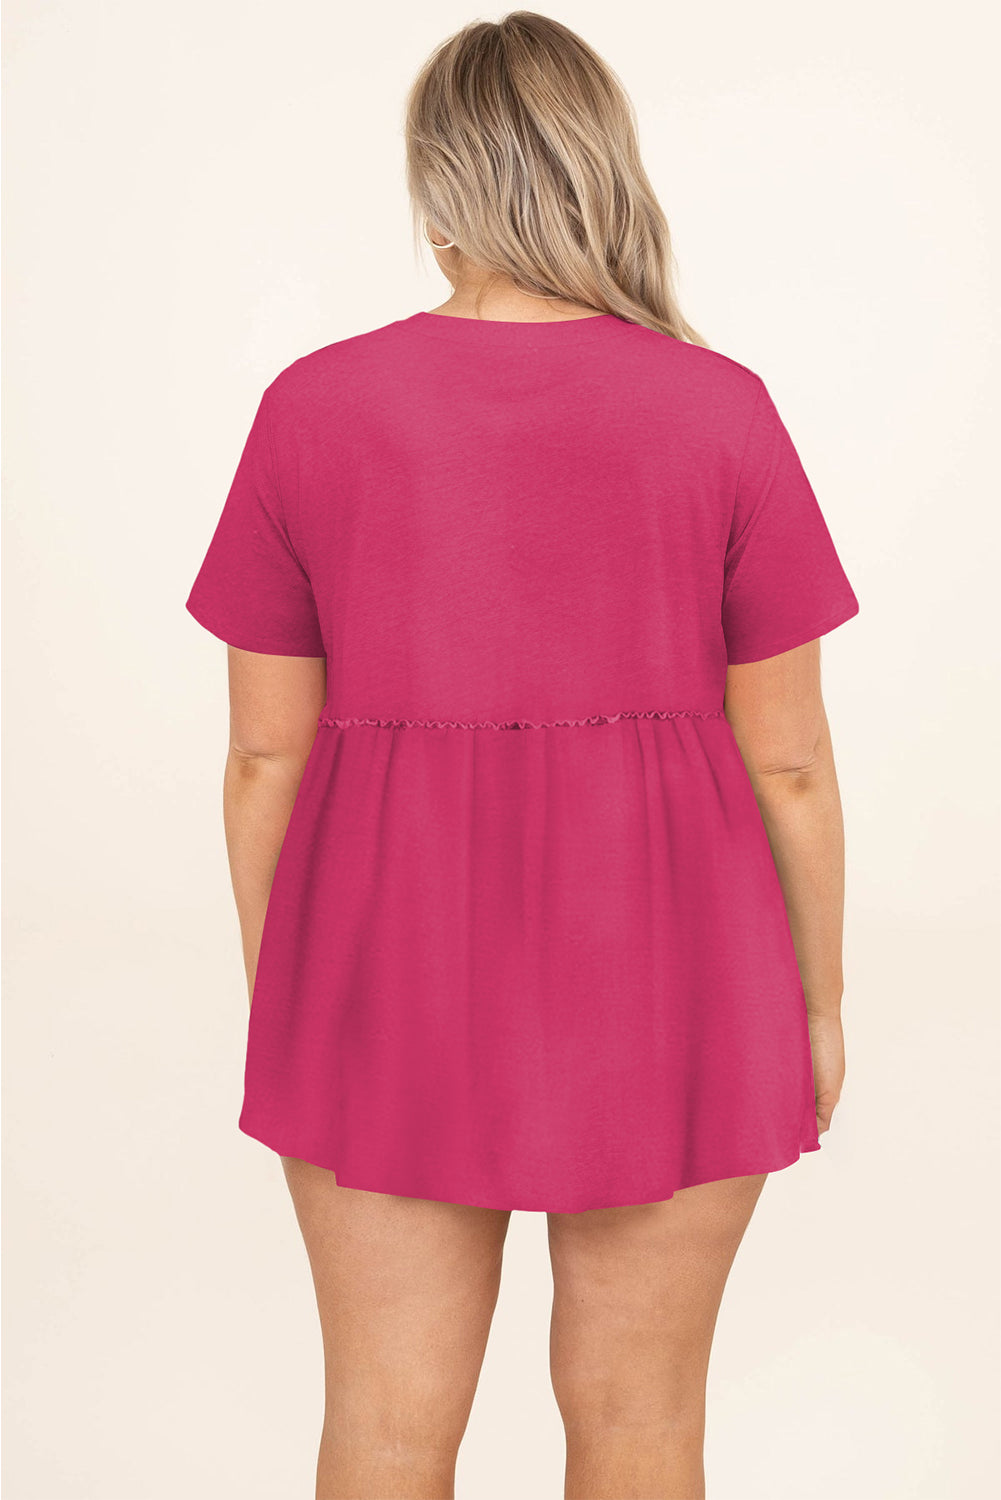 Rose Red Solid Color Short Sleeve Flowy Plus Size Top